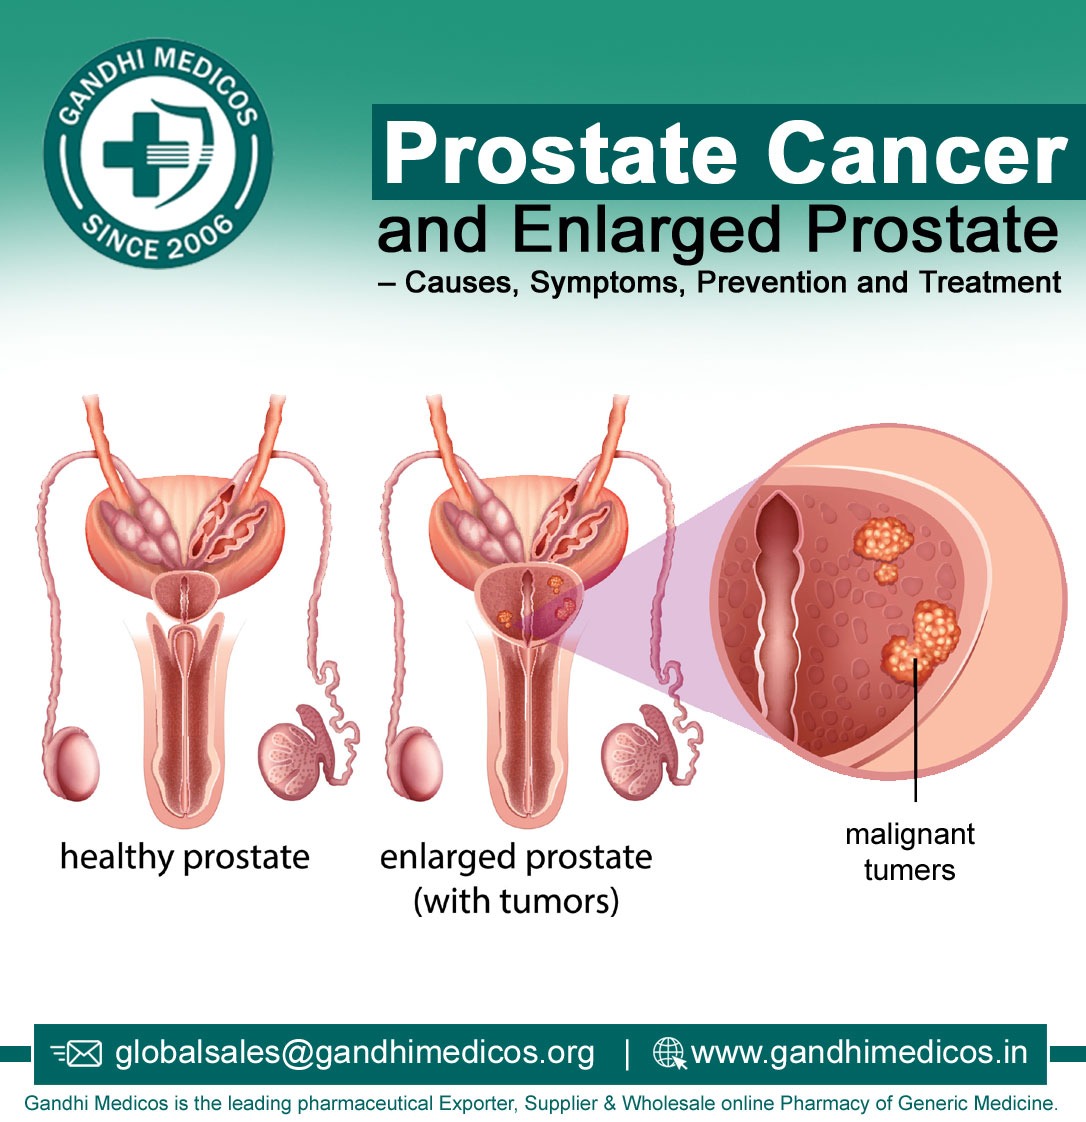 Prostate Cancer and Enlarged Prostate